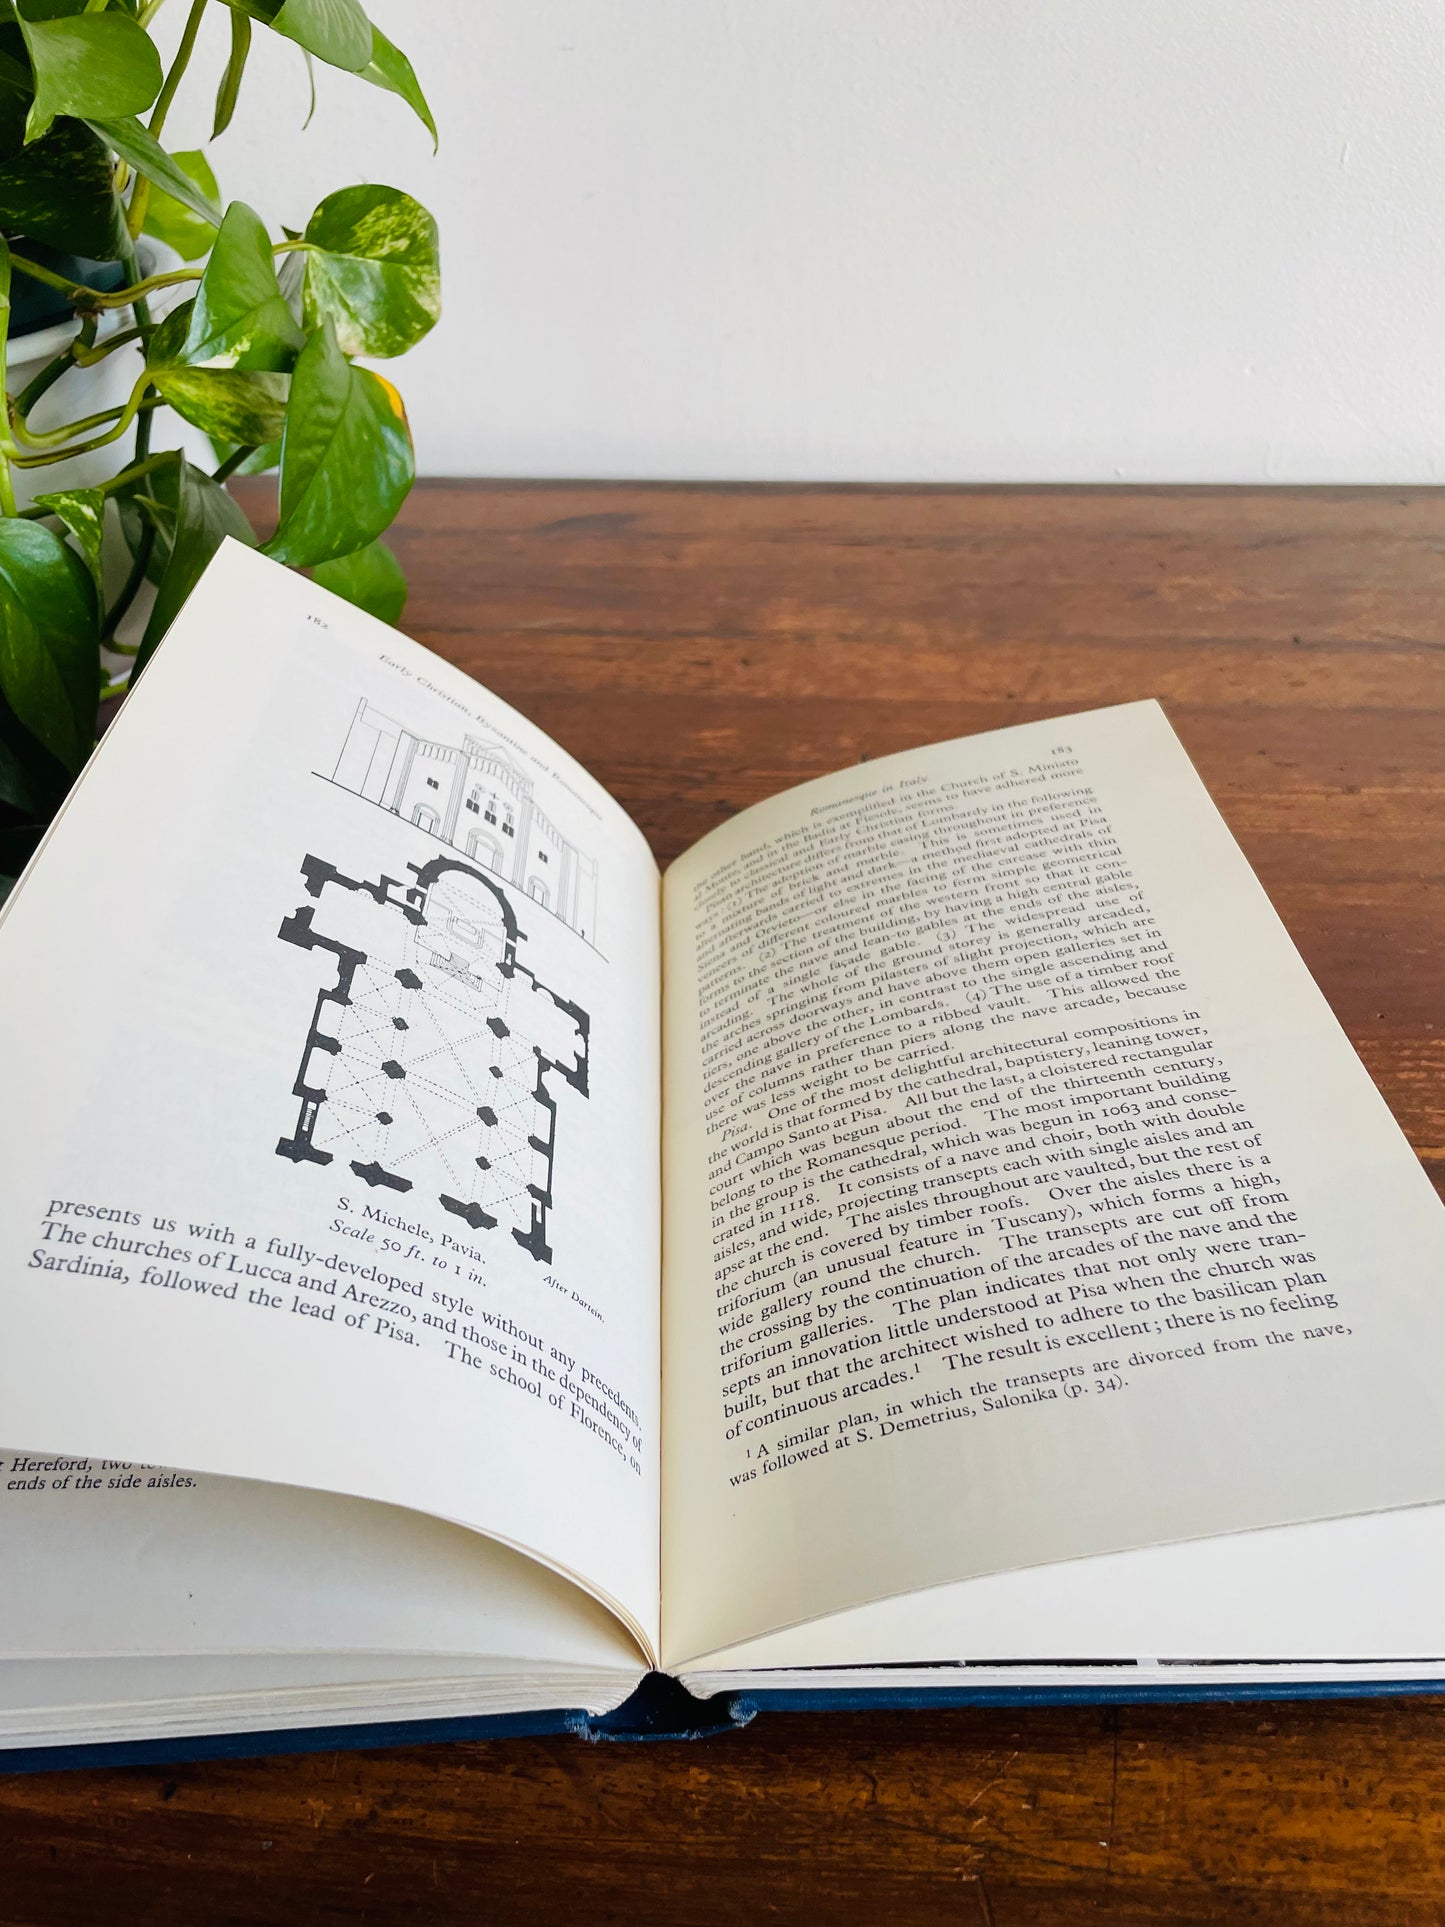 Simpson's History of Architectural Development Volume II by Cecil Stewart Hardcover Book - Early Christian, Byzantine & Romanesque Architecture (1959)